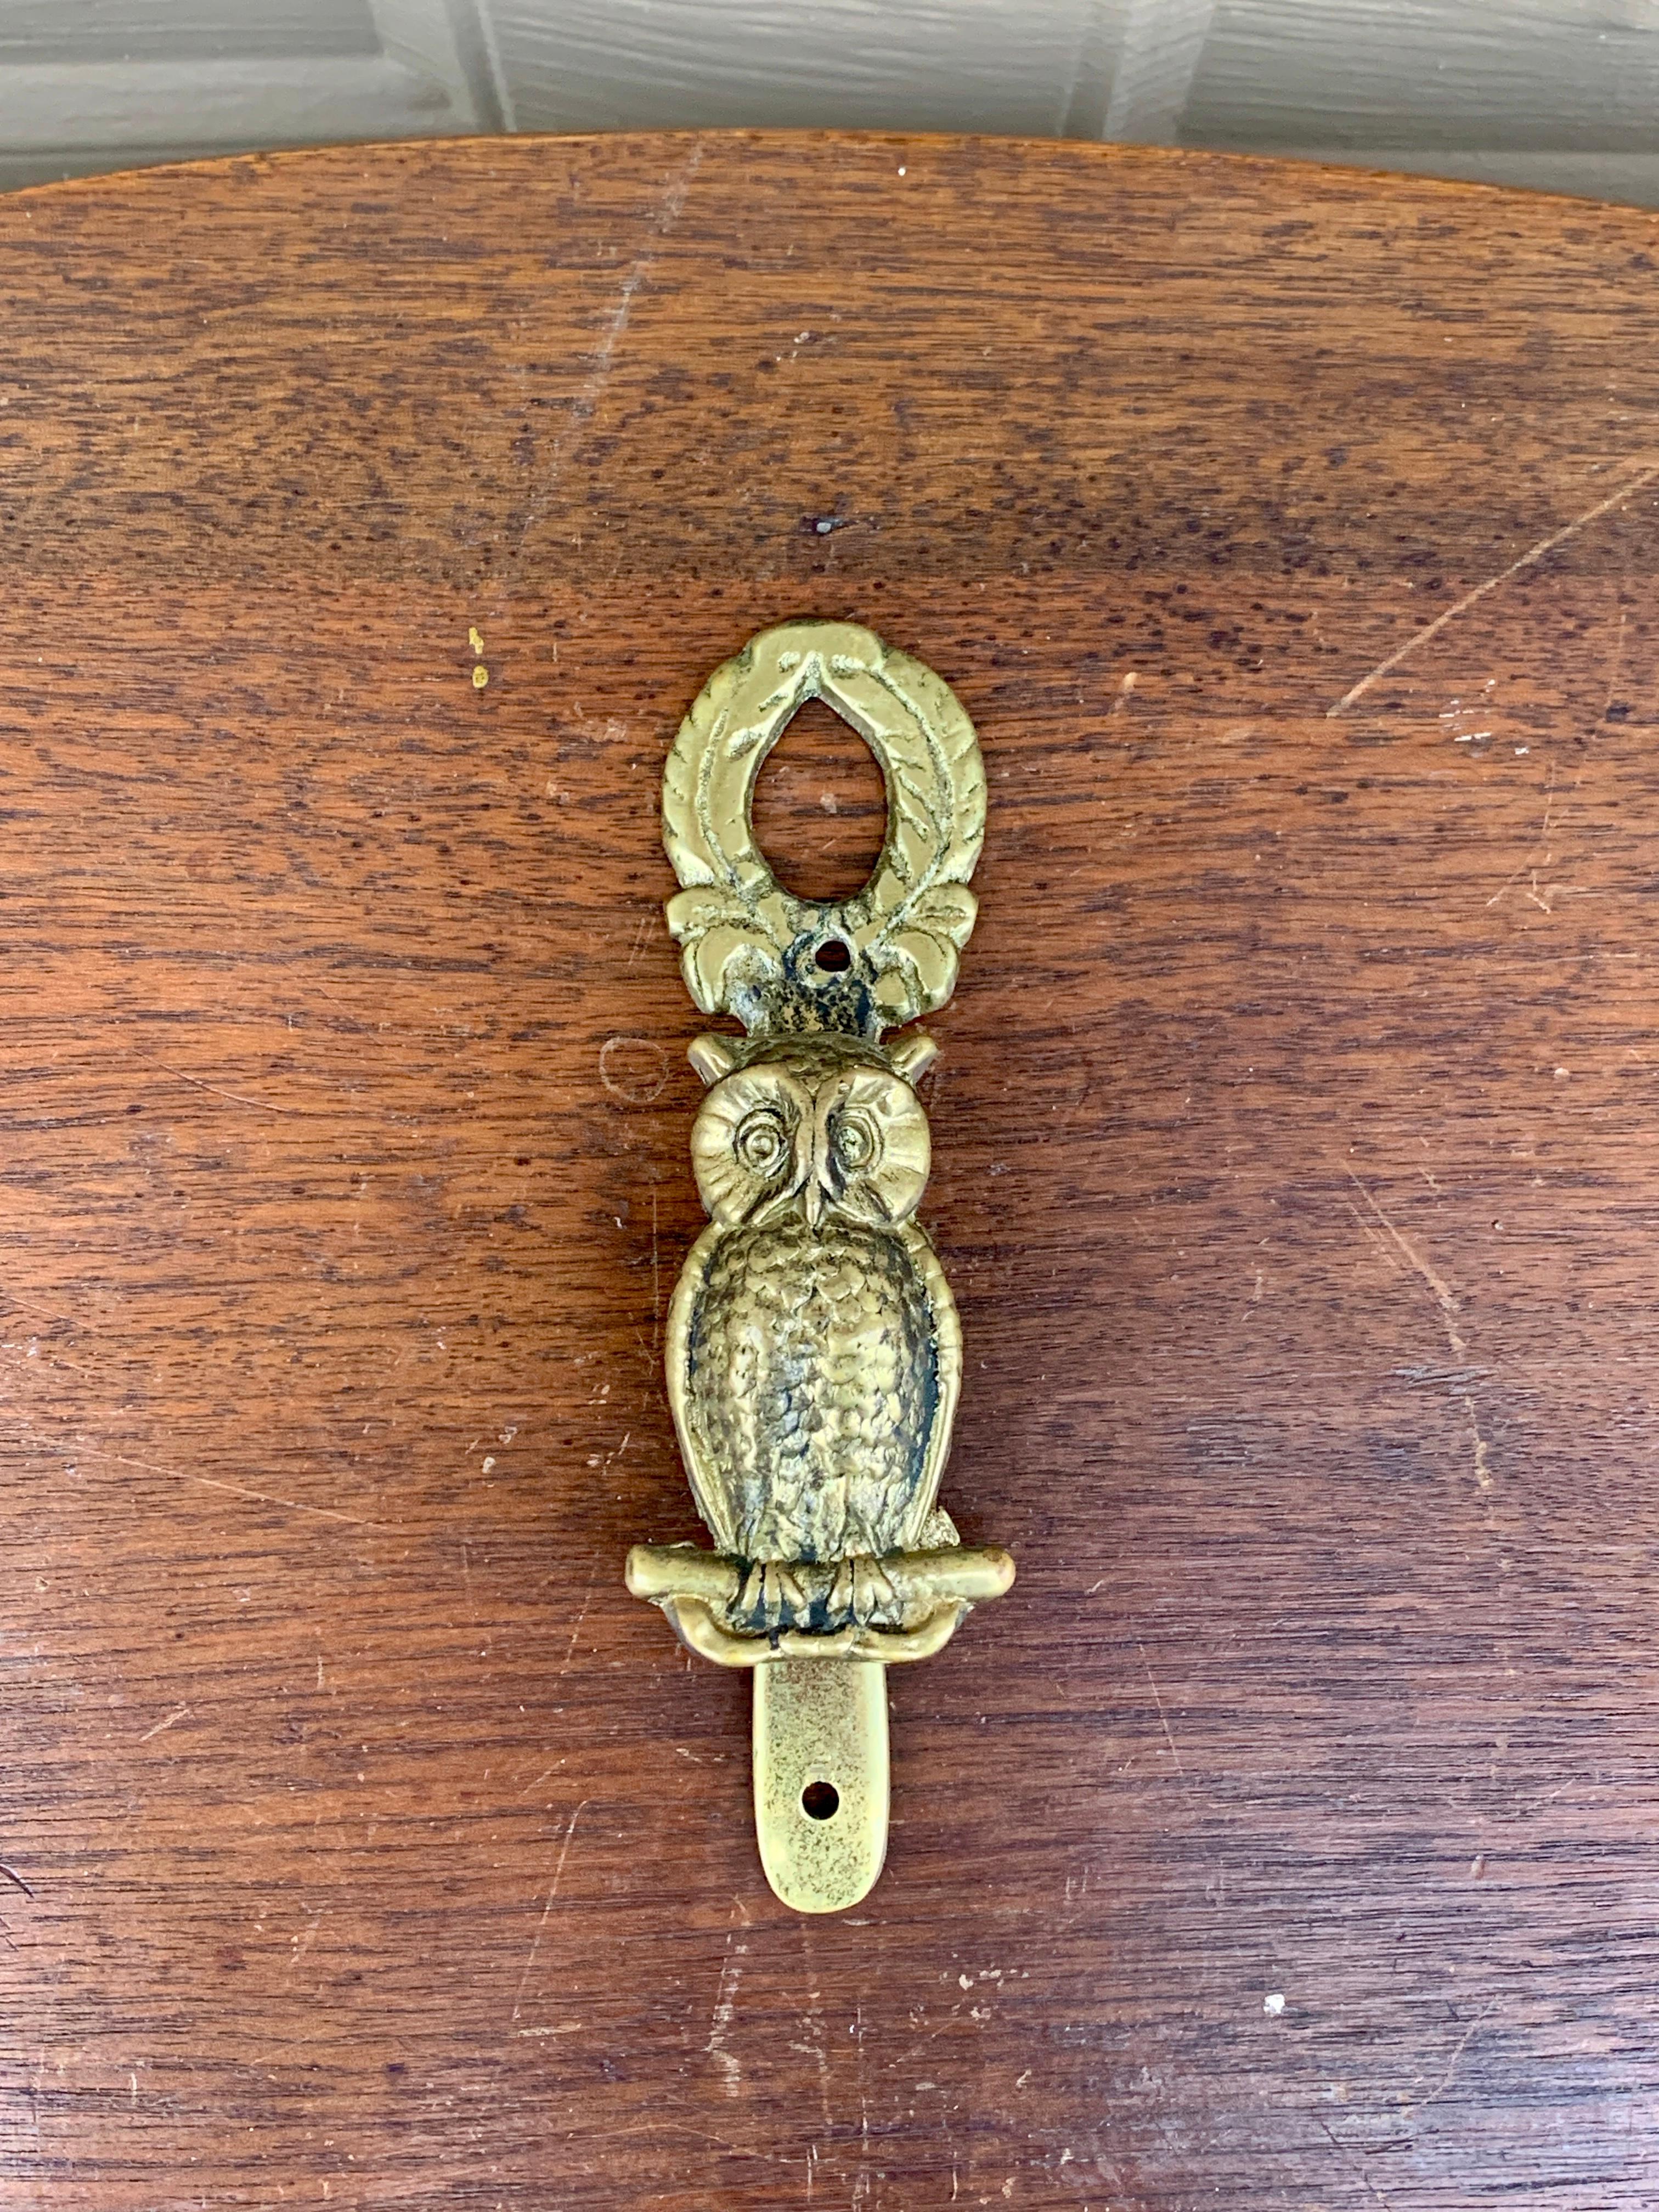 A beautiful cast brass door knocker in the form of an owl perched on a branch. What a charming piece to add a touch of uniqueness to your home.

England, Mid-20th Century

Measures: 1.5